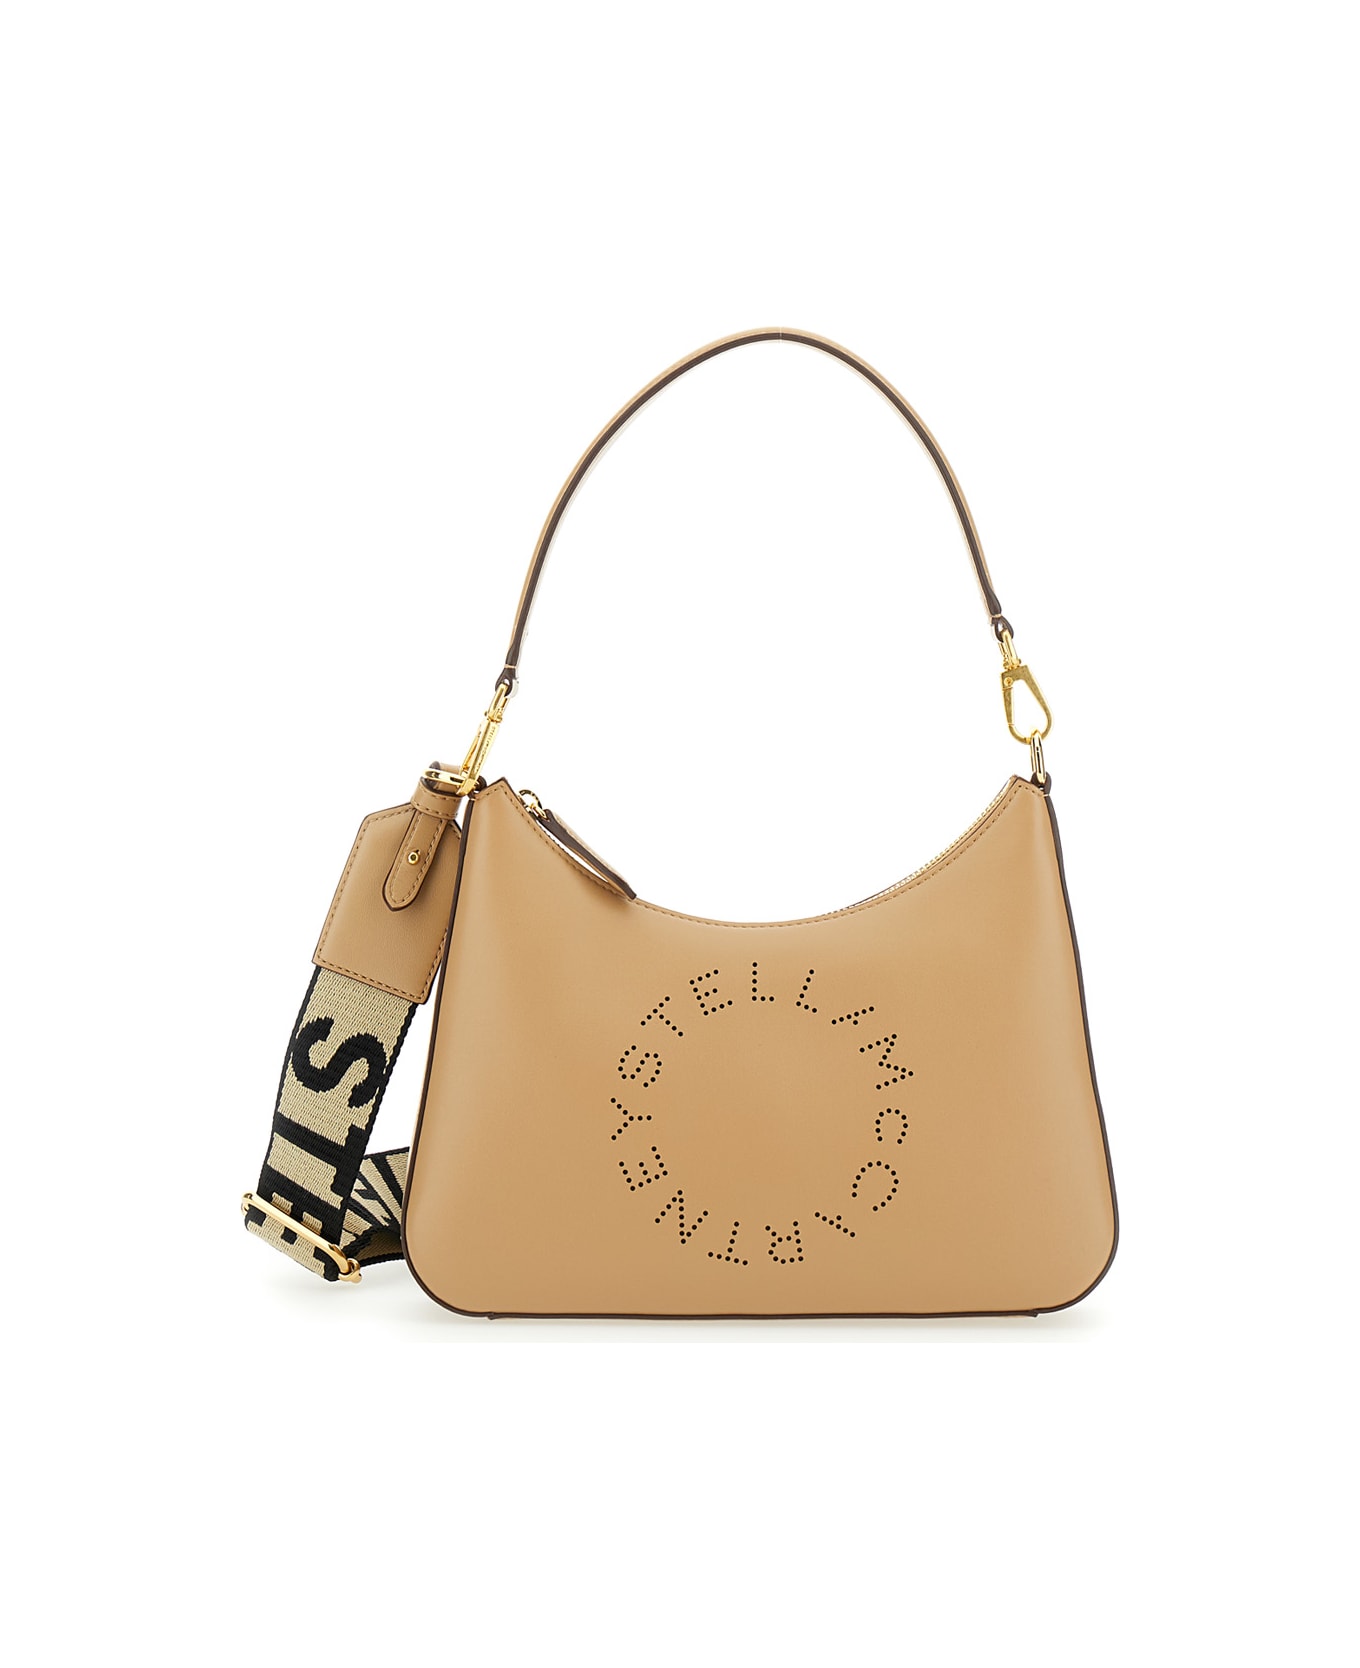 Stella McCartney Beige Shoulder Bag With Perforated Logo In Eco Leather Woman - Beige